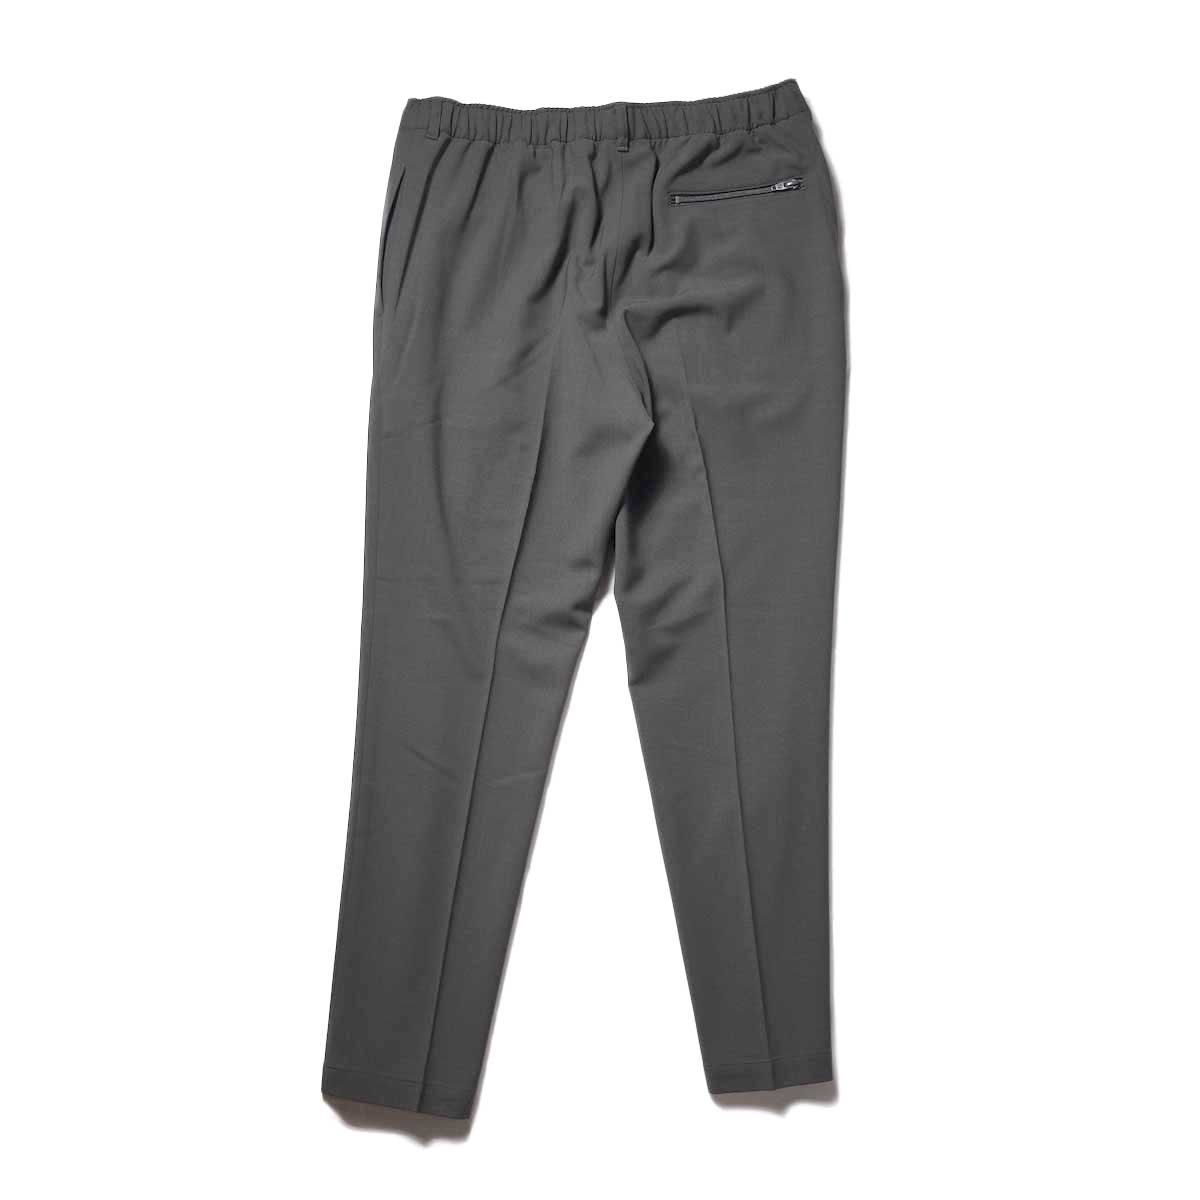 N.HOOLYWOOD / 2222-CP07-023 TAPERED EASY PANTS (Charcoal)背面